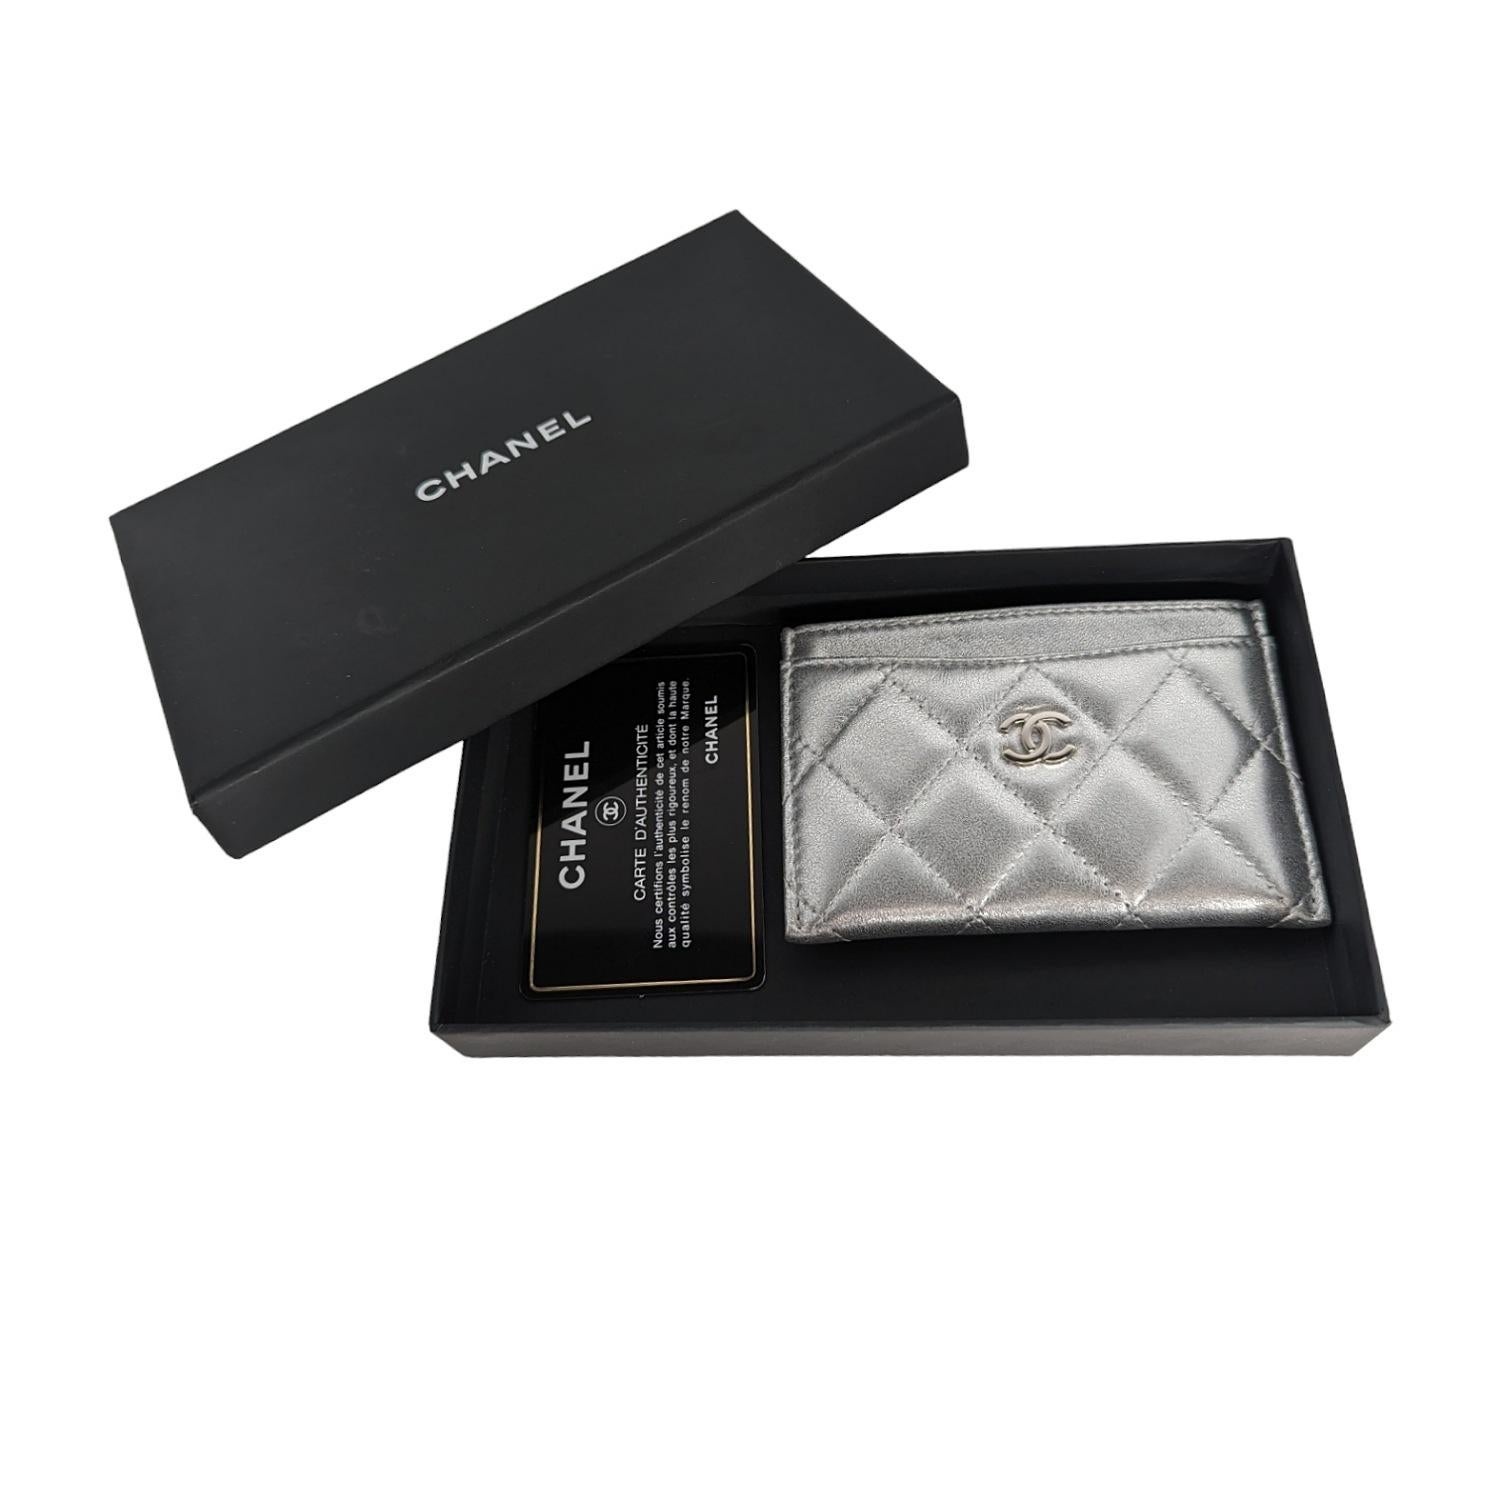 This stylish holder is crafted of luxurious metallic diamond quilted lambskin leather in silver with a silver frontal Chanel CC logo. The exterior features three card slots with beige fabric interiors and a main compartment in the center with a